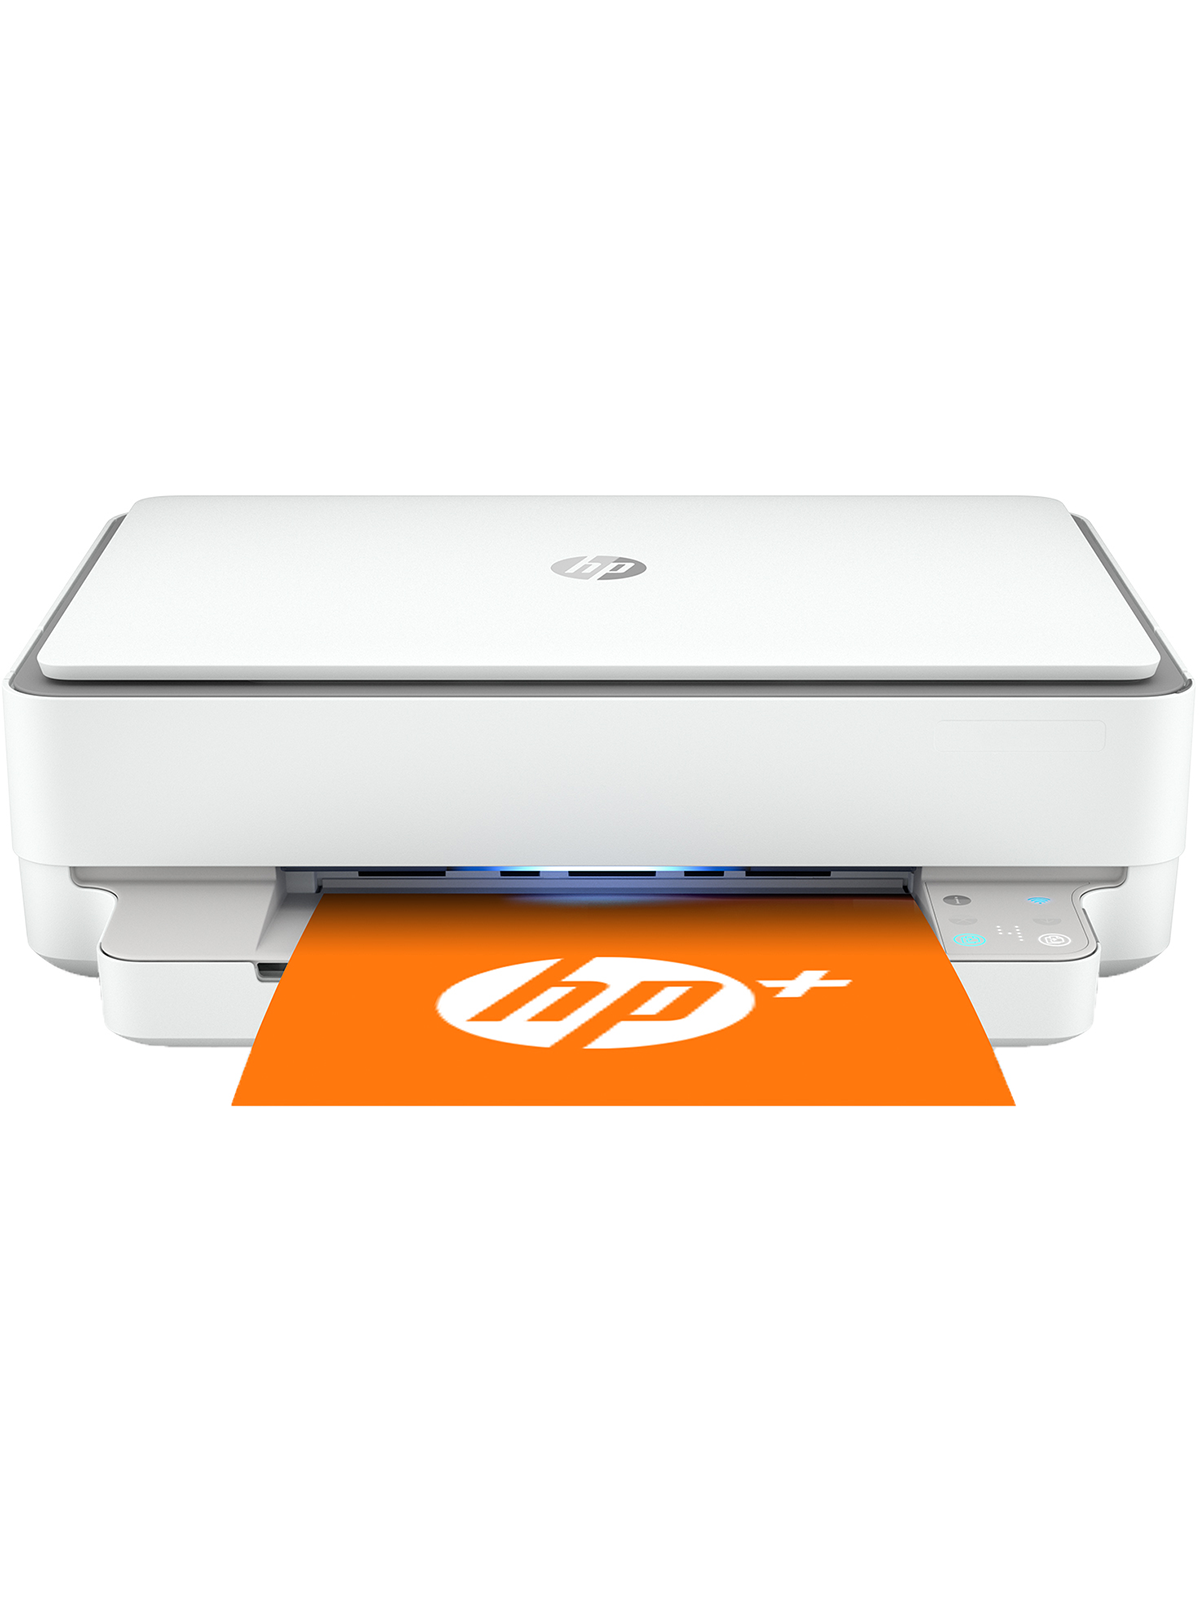 HP ENVY 6020e All-In-One Inkjet Printer - Grey / White (223N4B#687) with  ink #320518